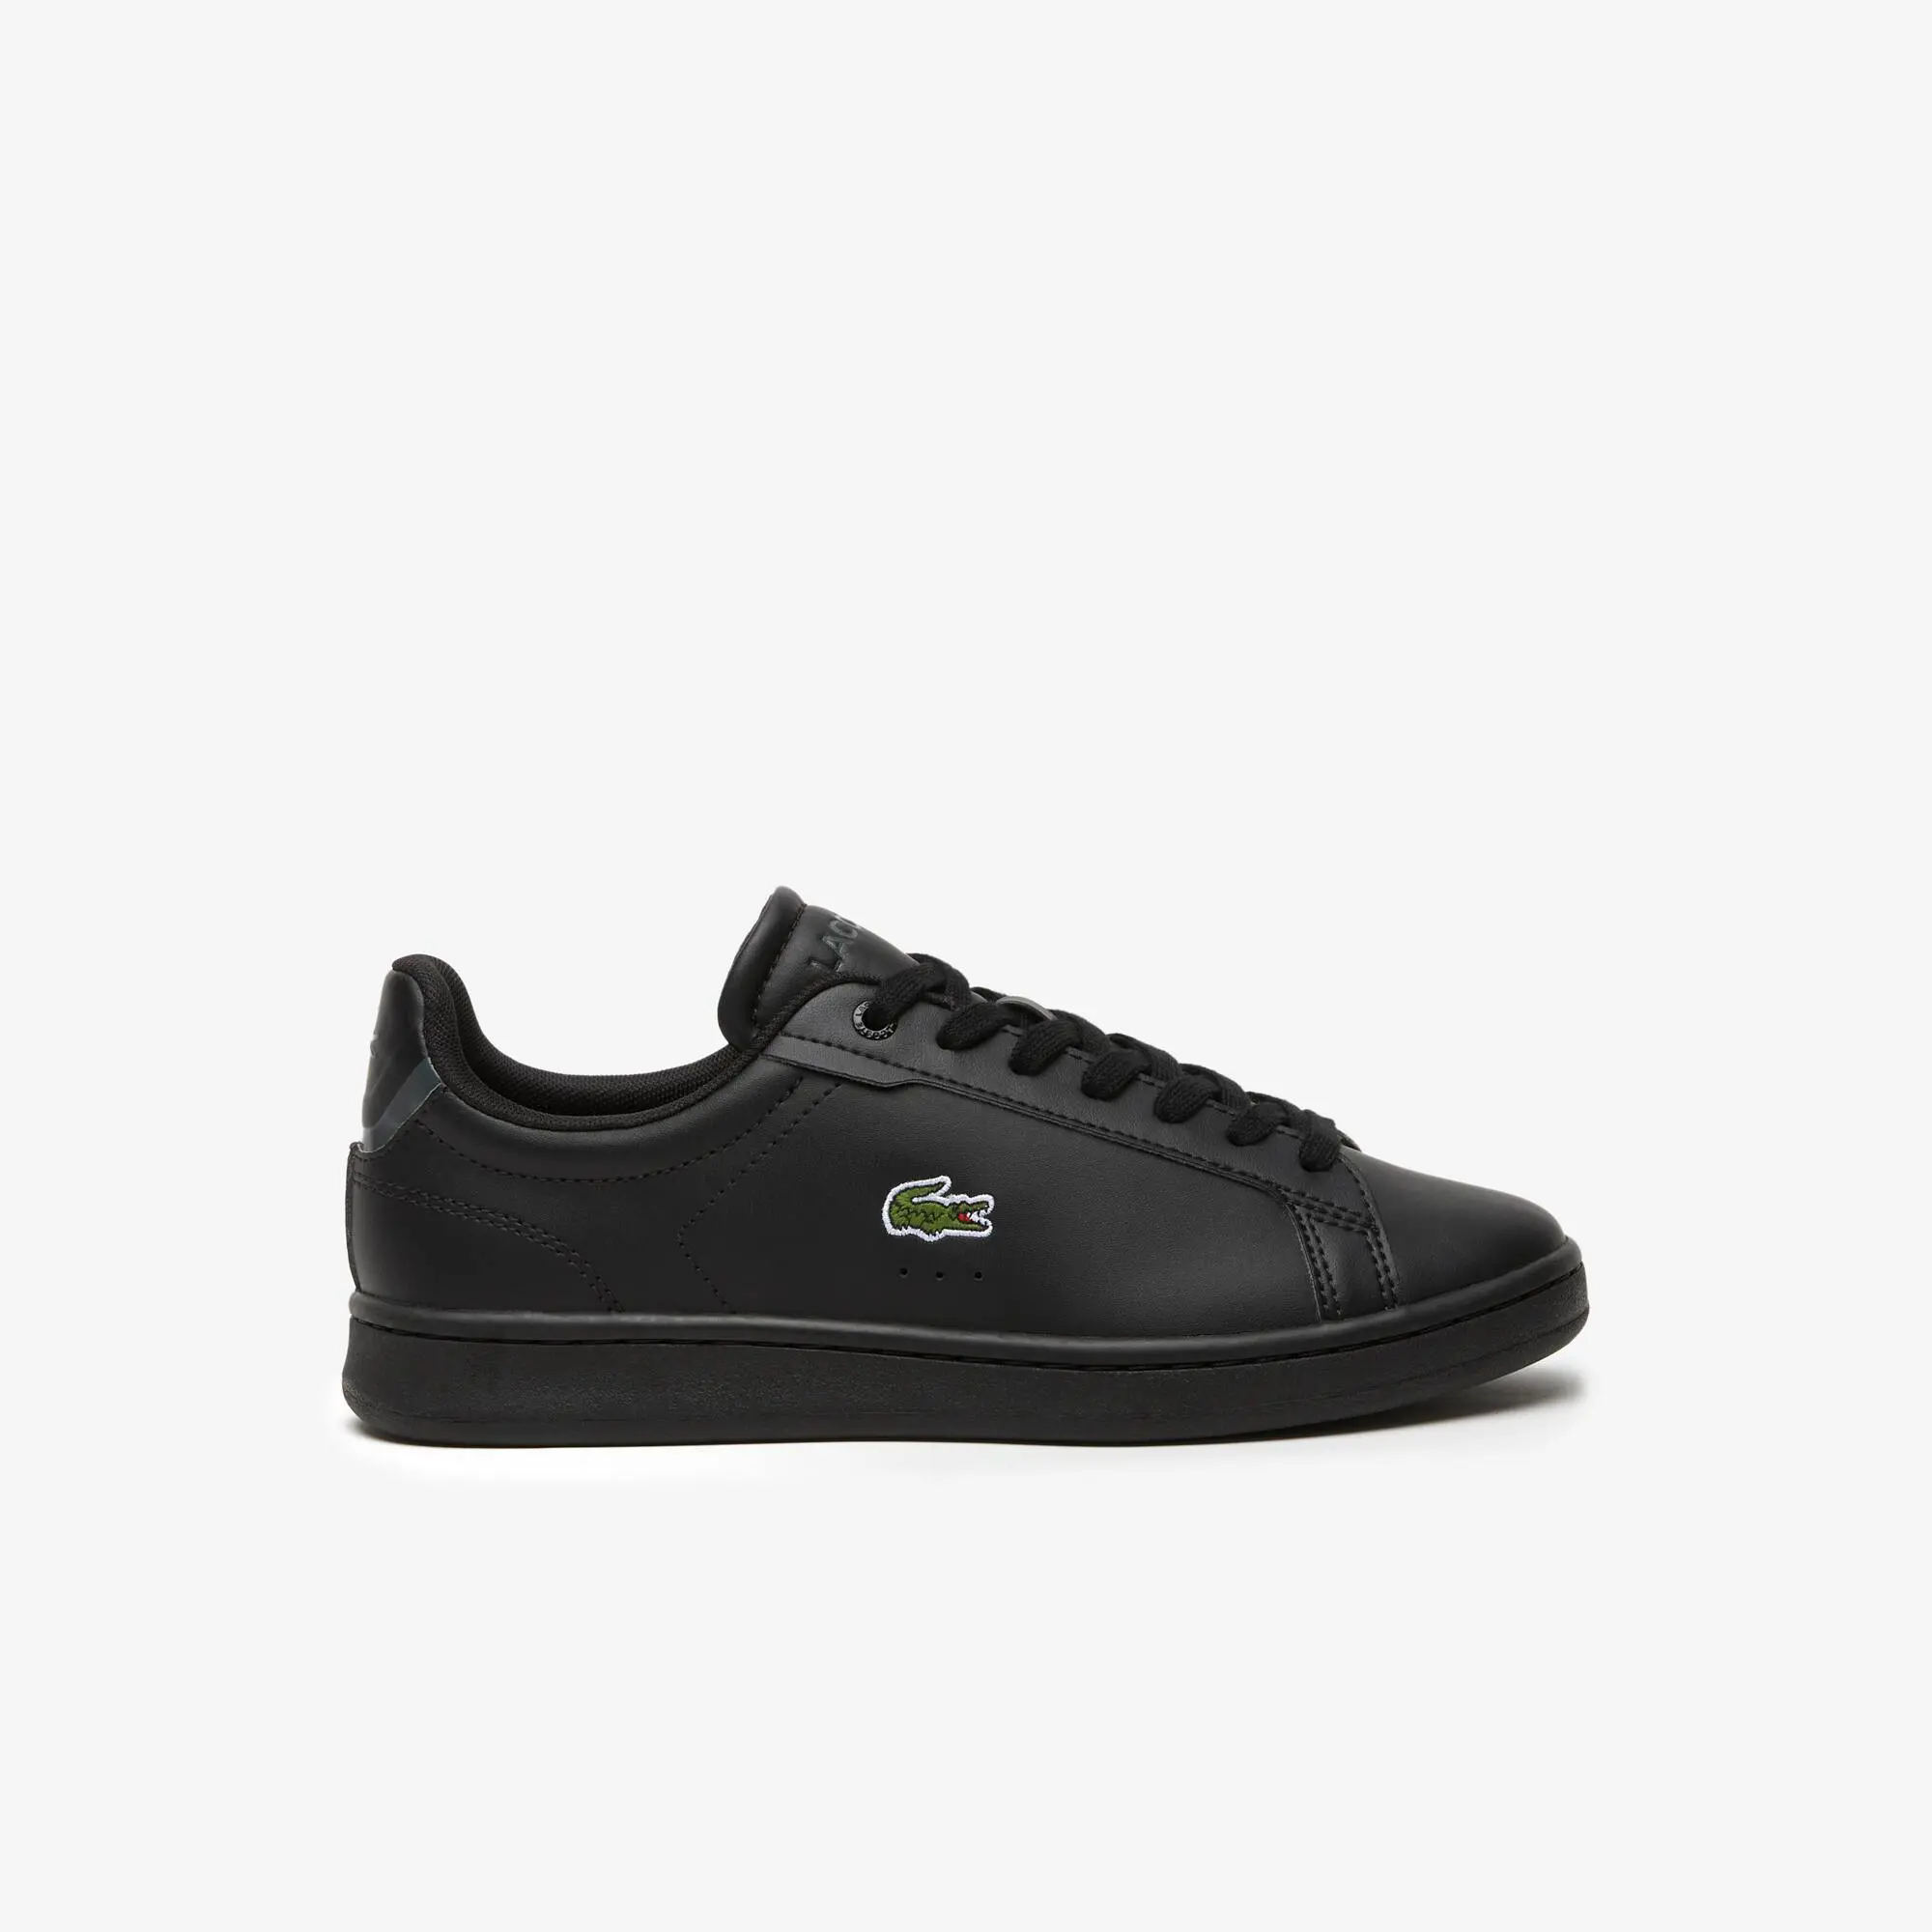 Lacoste Juniors' Lacoste Carnaby Pro BL Synthetic Tonal Trainers. 1